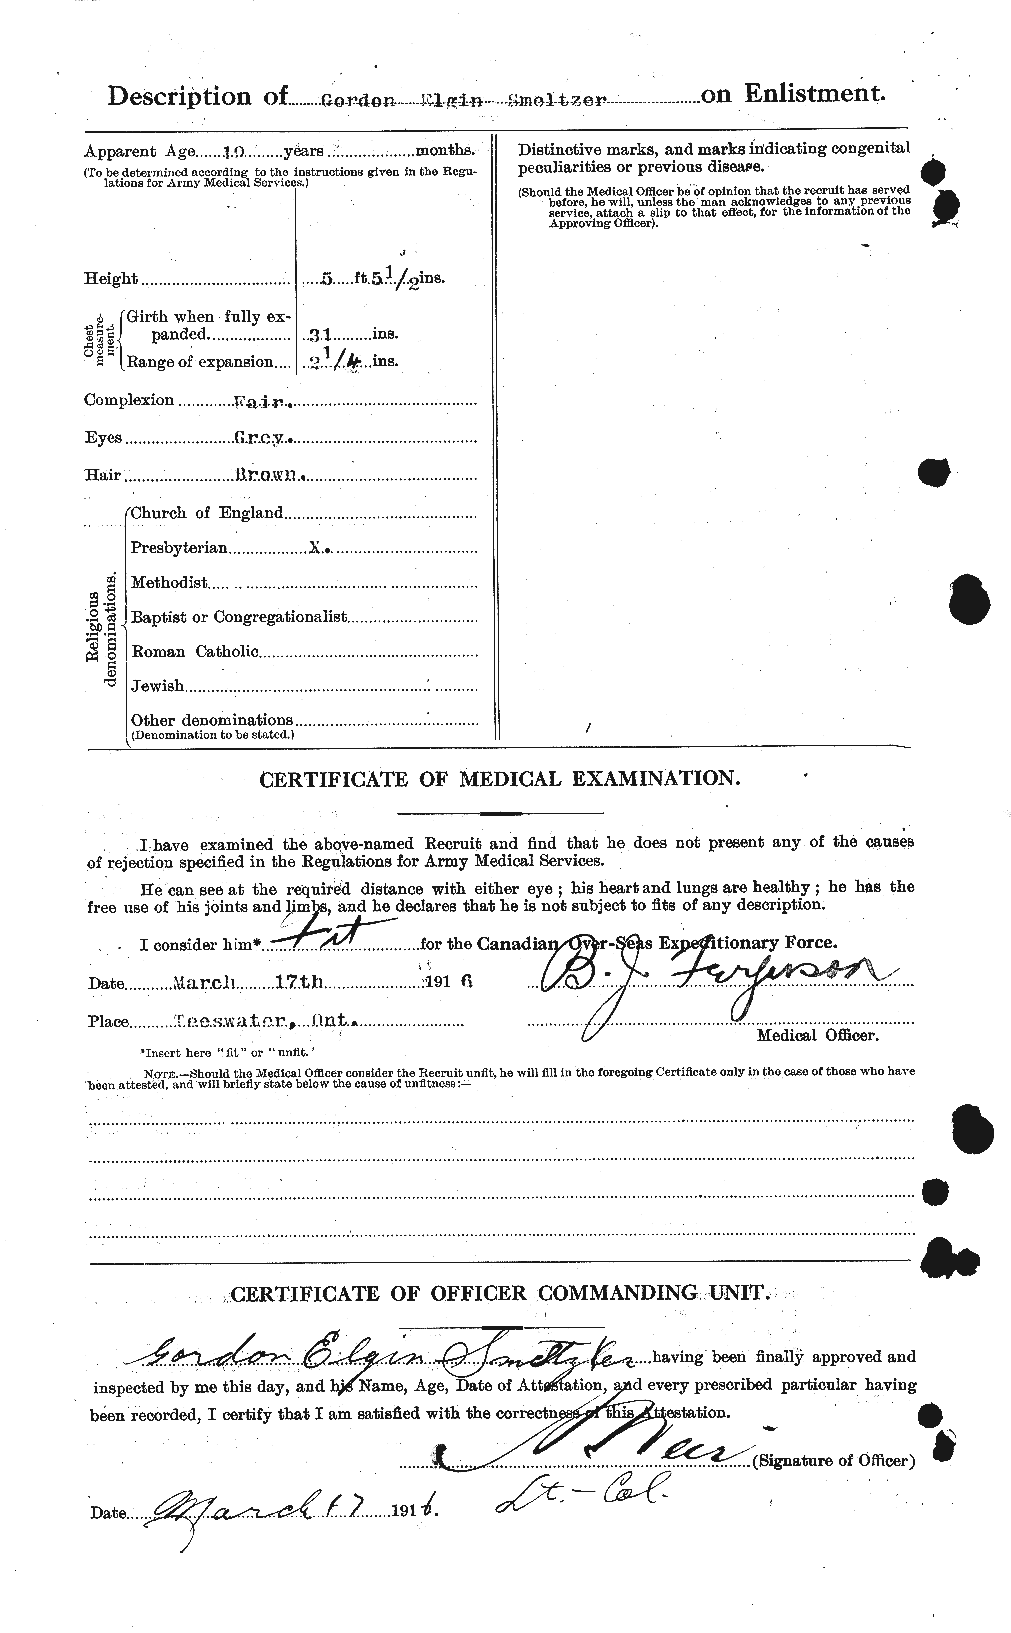 Personnel Records of the First World War - CEF 099818b